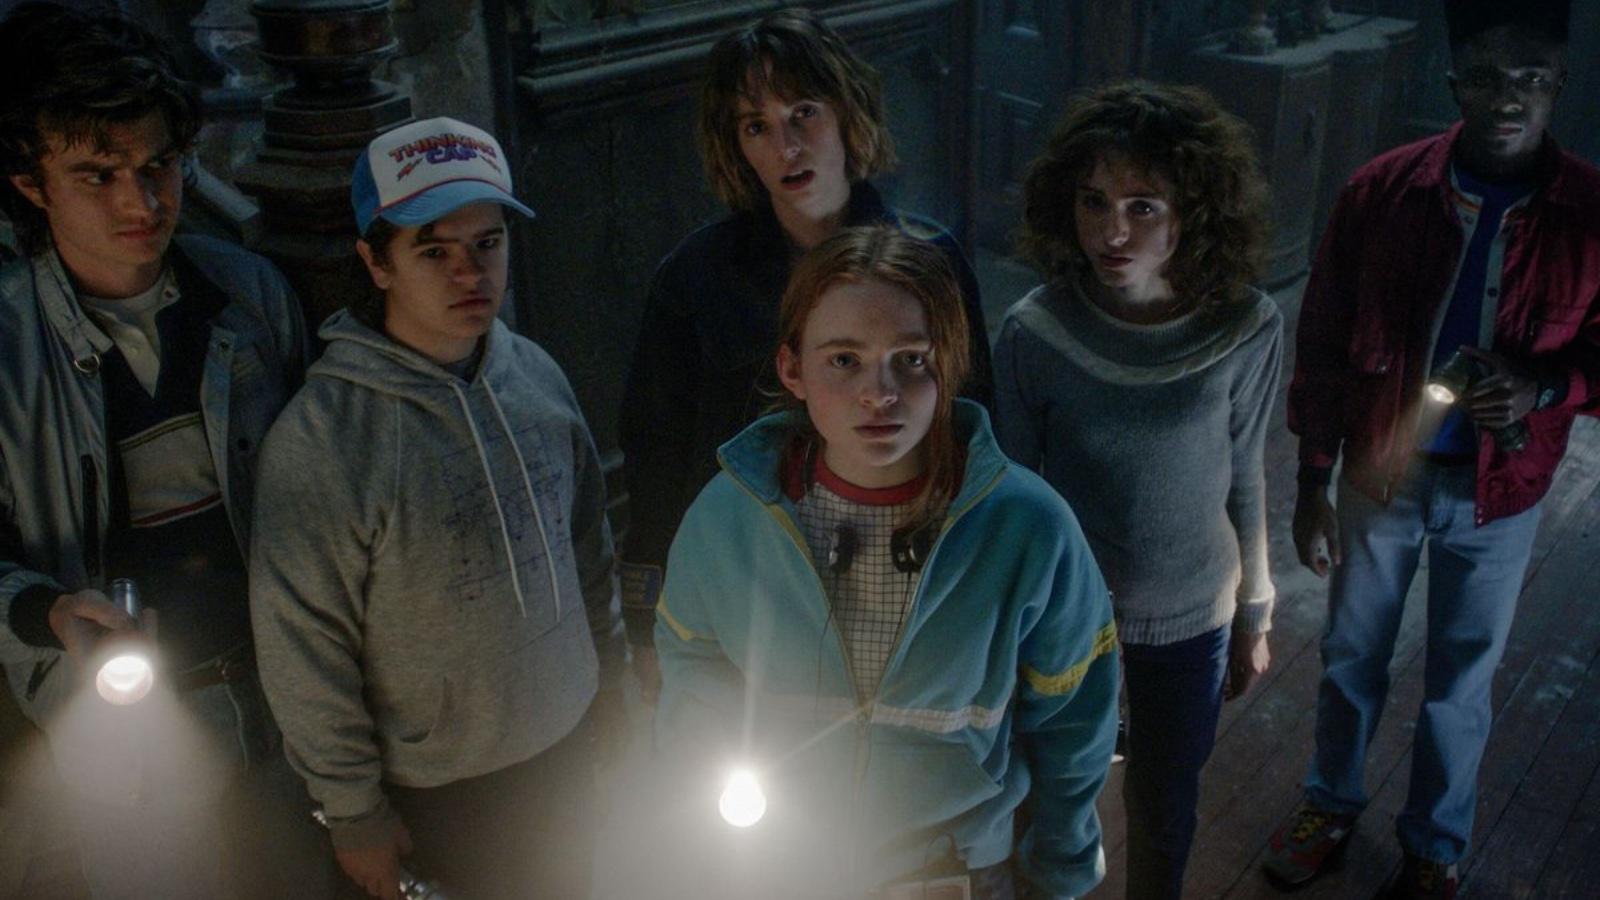 Dustin, Max and the characters in Stranger Things Season 4.